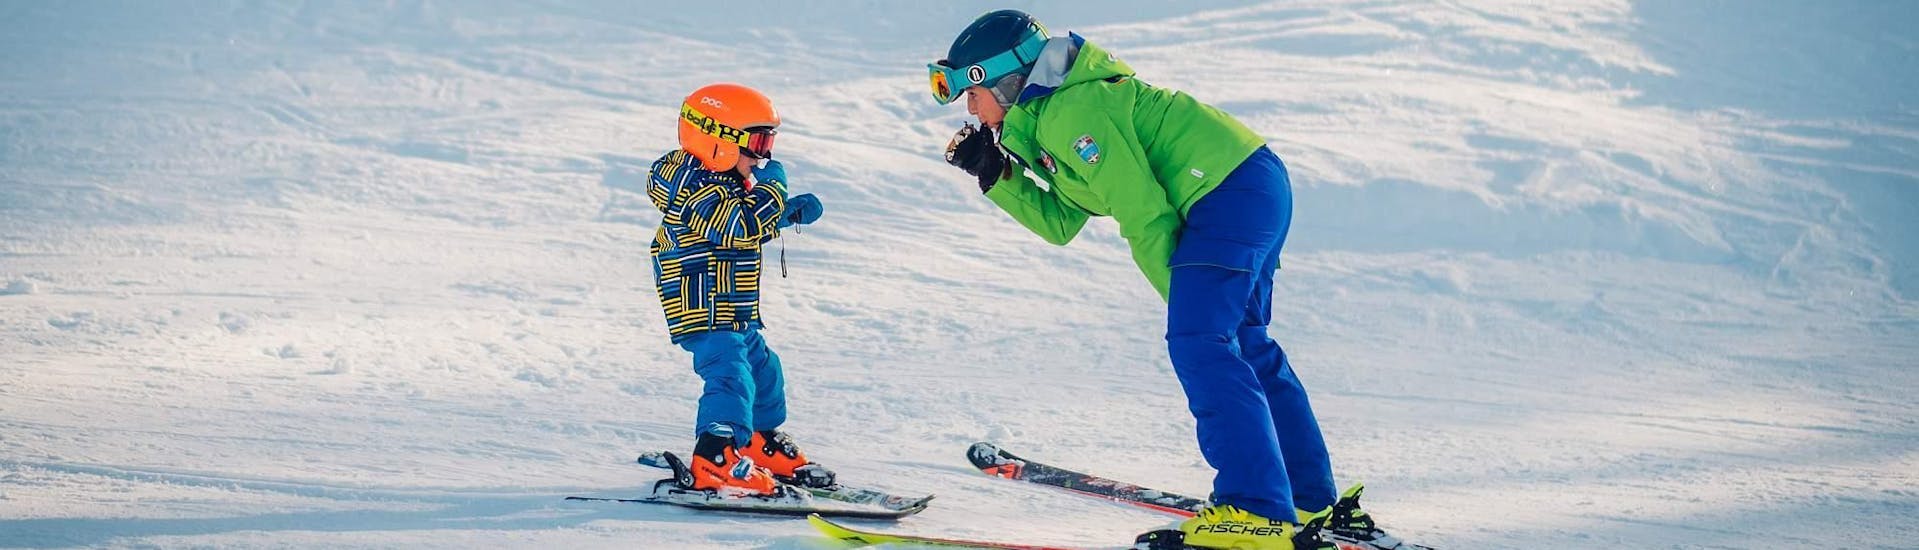 Little skier learns how to ski during Private Ski Lessons for Kids - All Levels with an instructor from the ski school Scuola di Sci B.foxes.